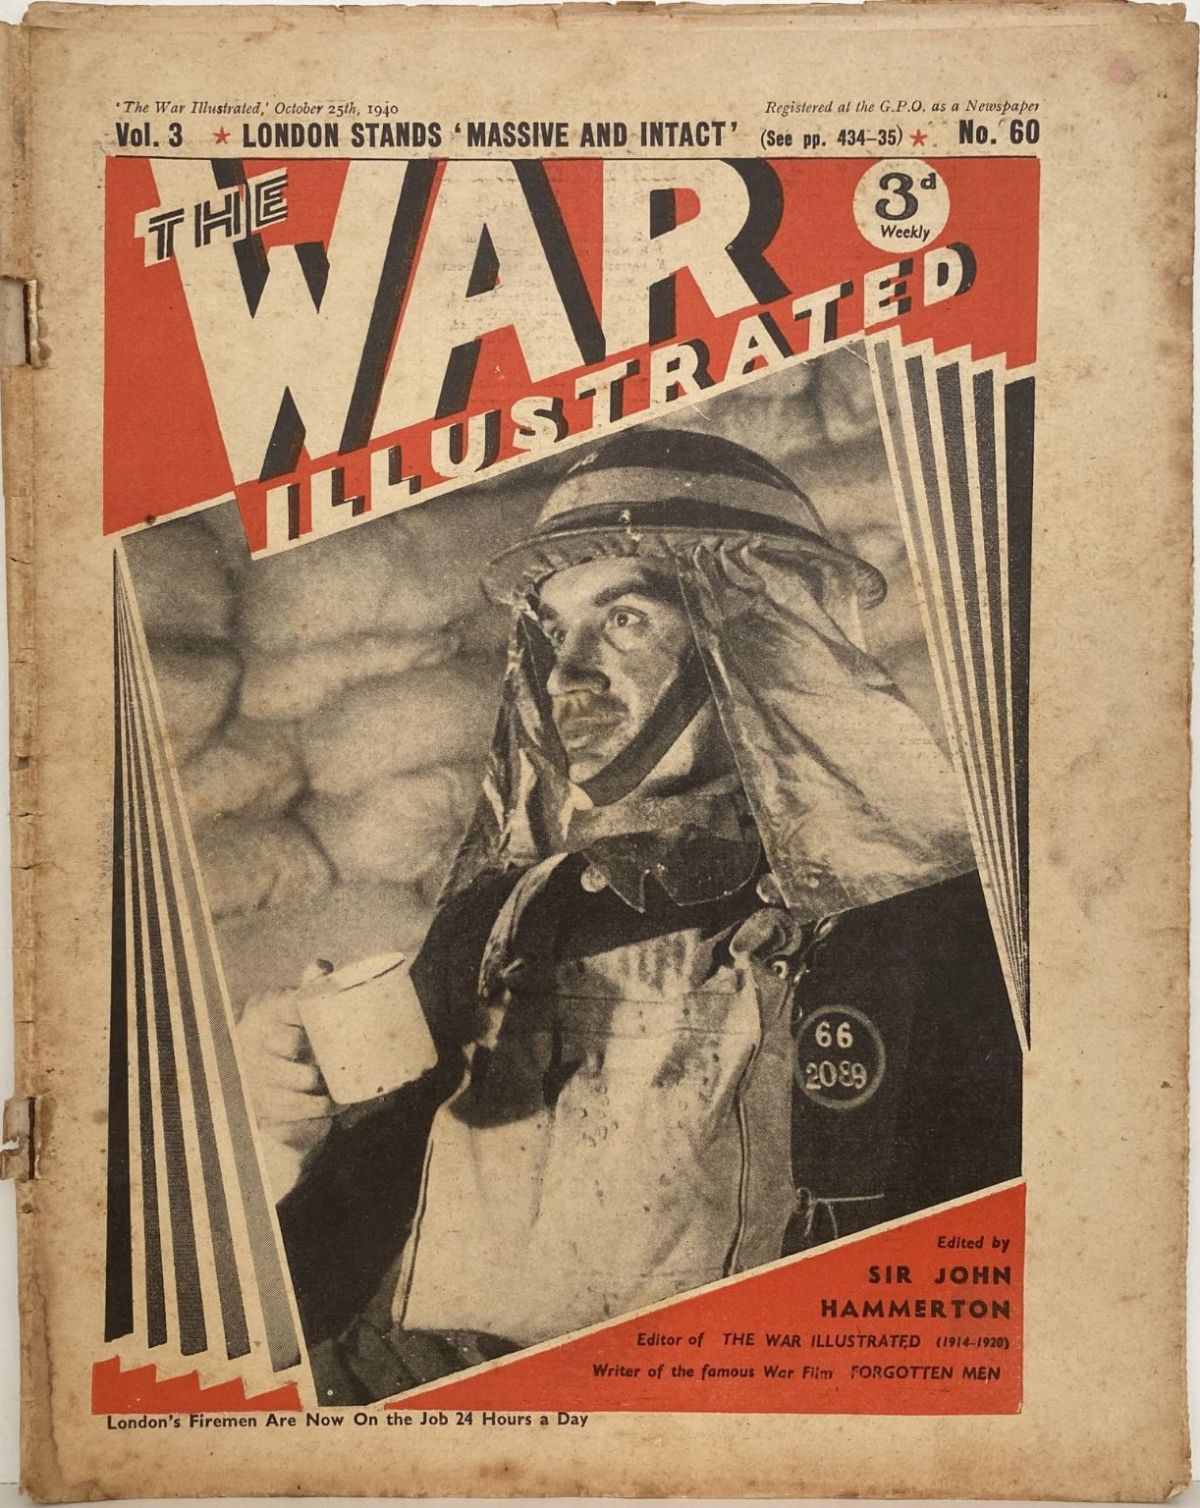 THE WAR ILLUSTRATED - Vol 3, No 60, 25th Oct 1940